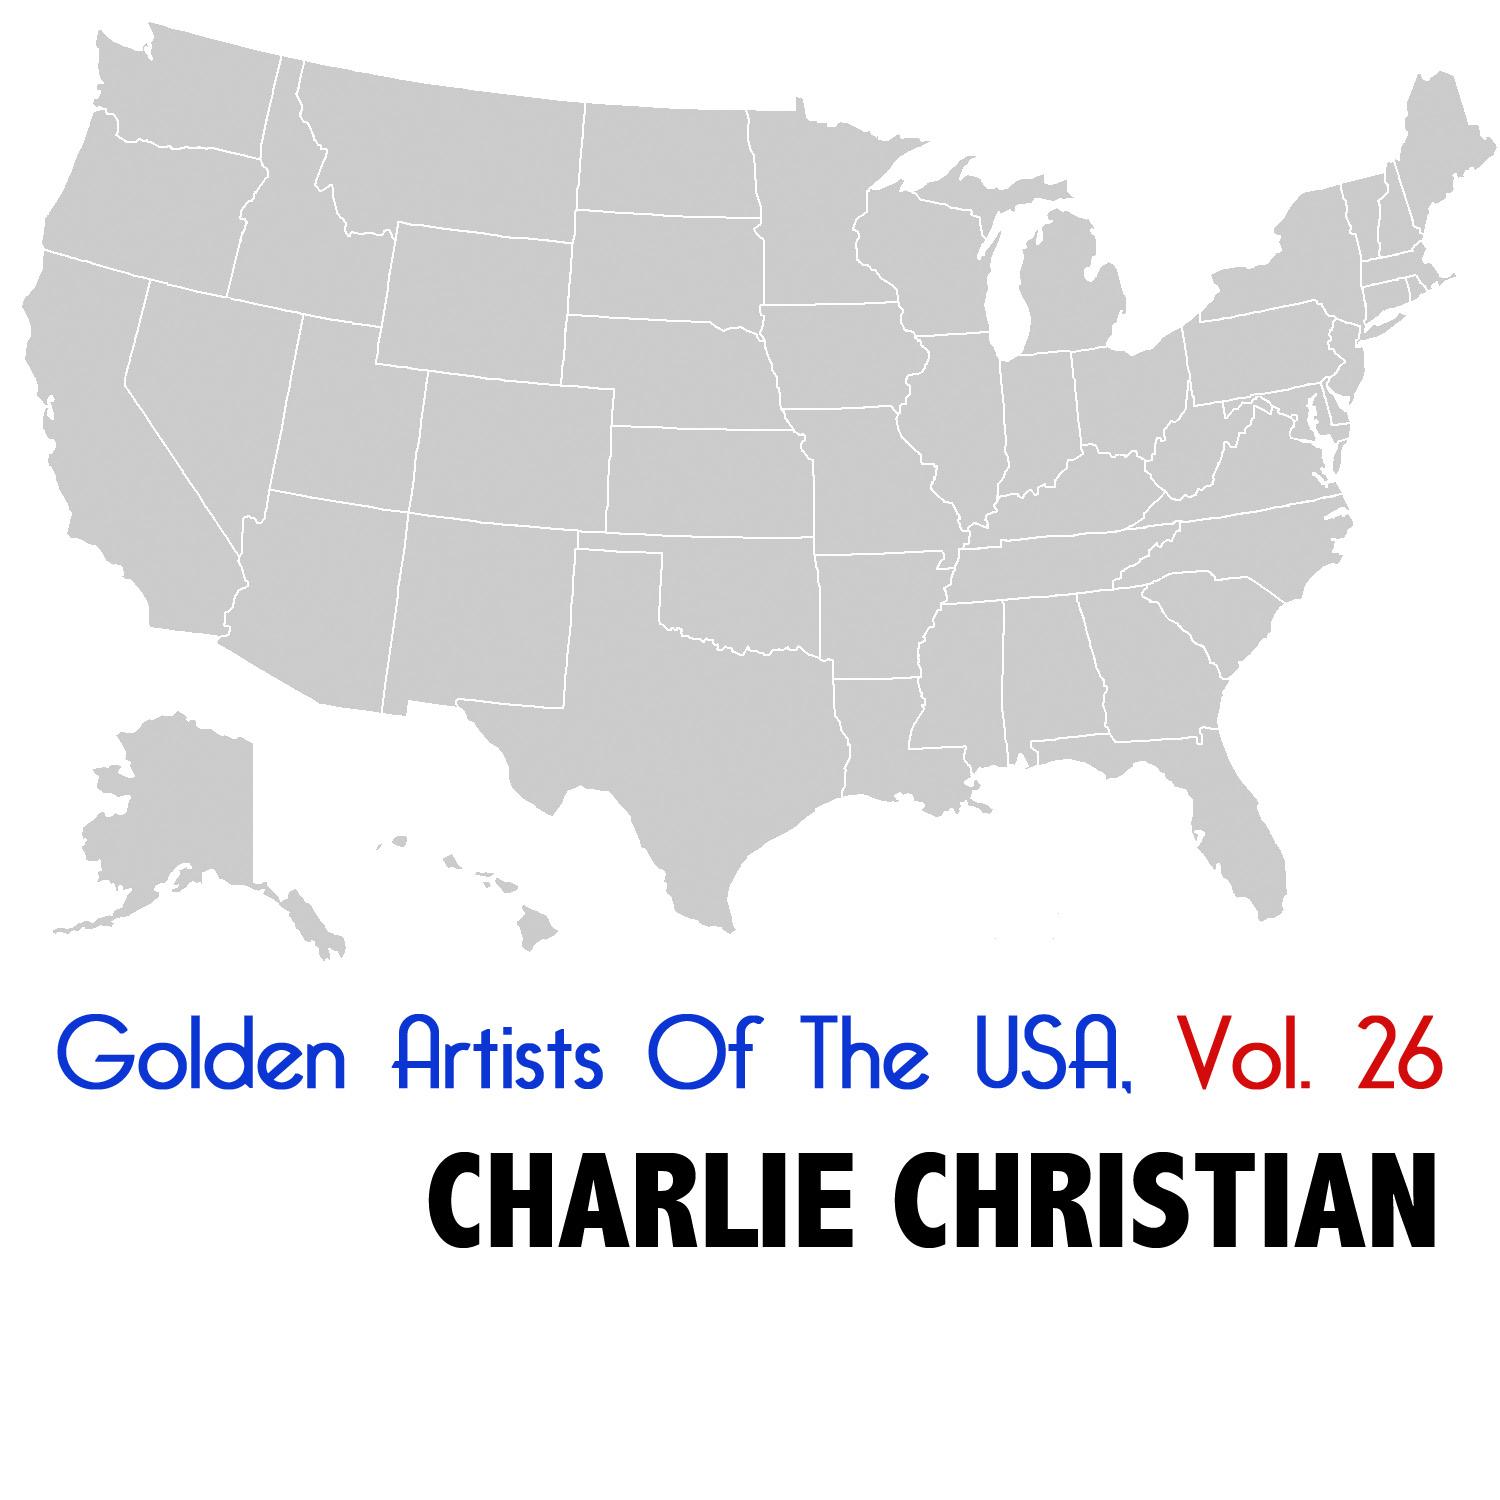 Golden Artists of the USA, Vol. 26